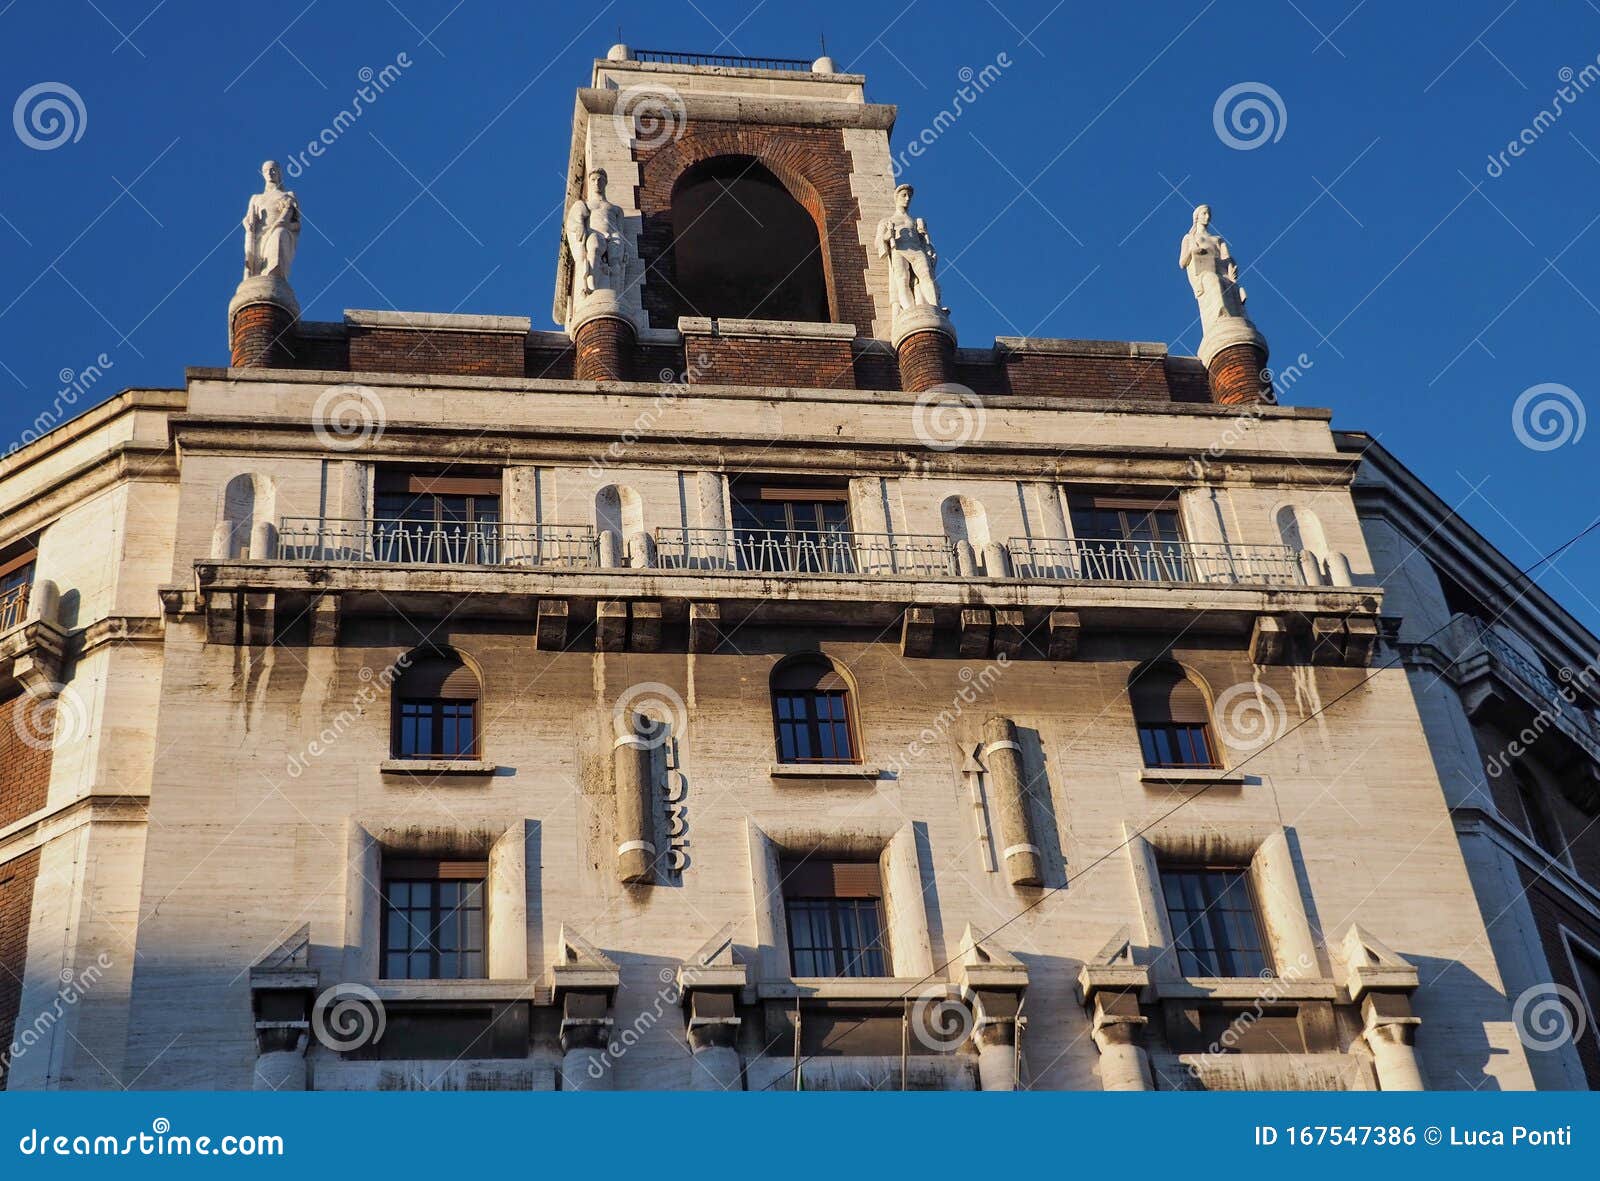 milan, italy - december 23, 2019 : view of agenzie delle entrate building